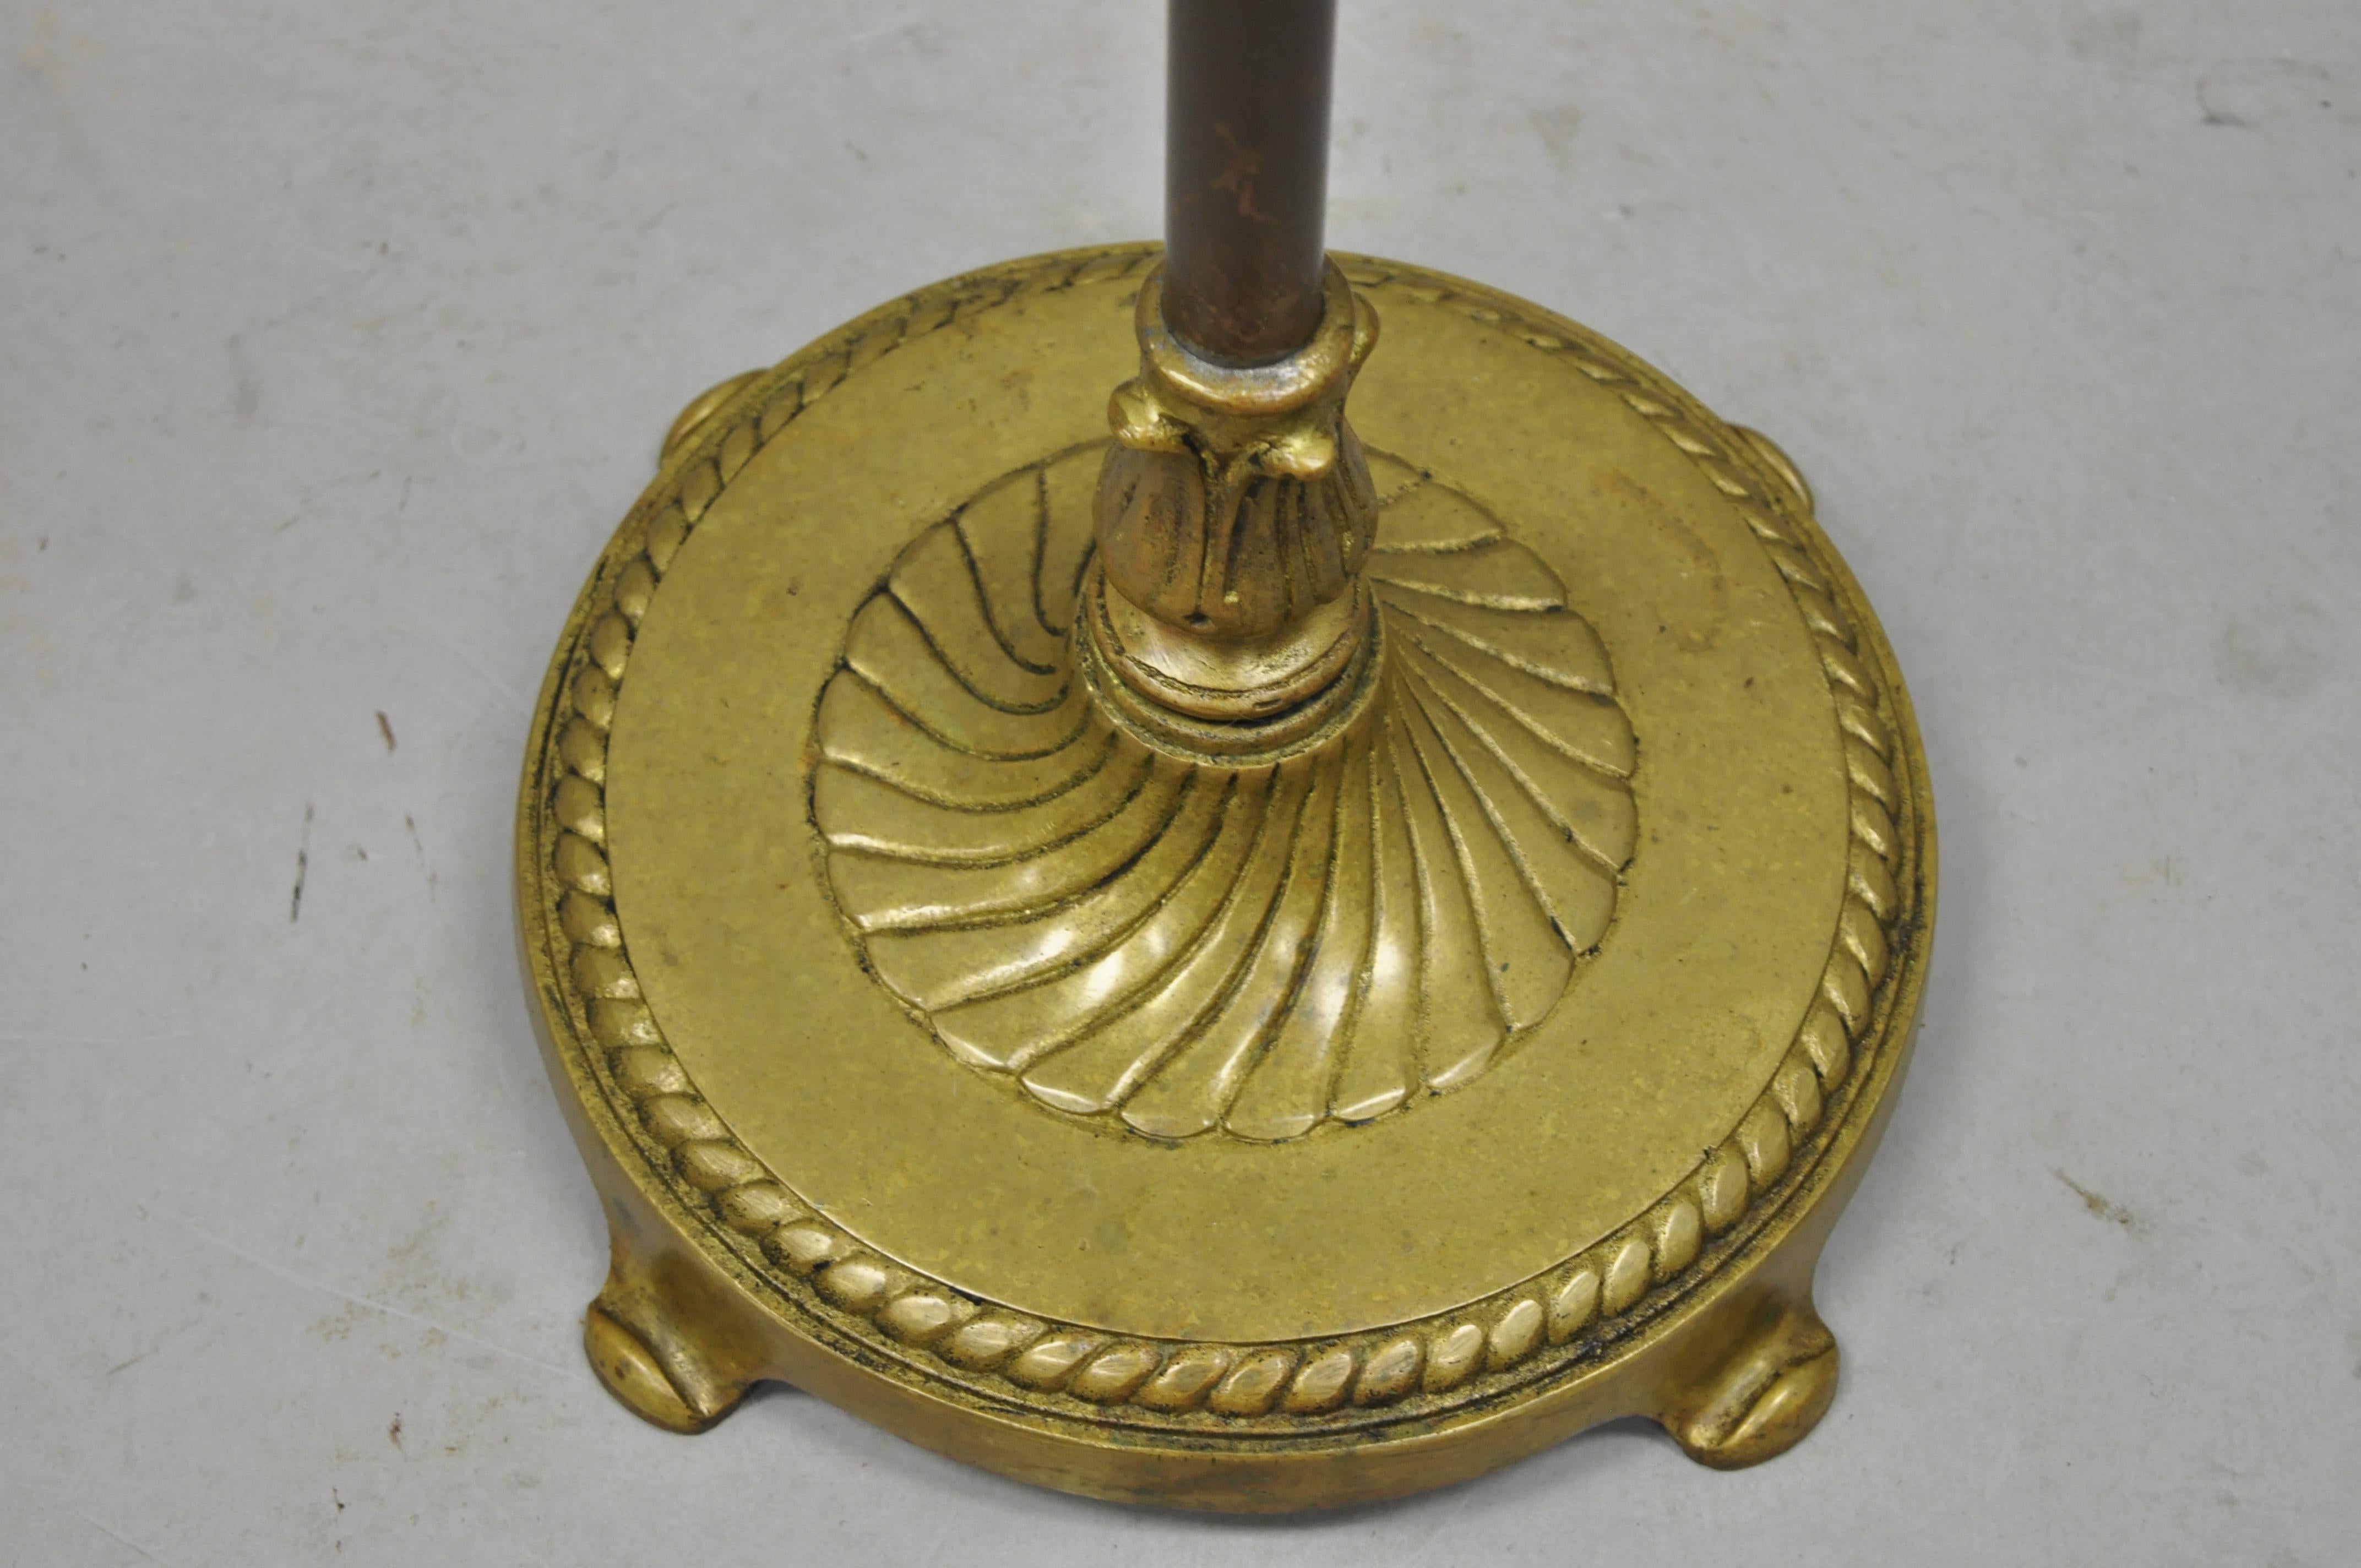 20th Century Vtg Brass Empire Cannonball Finial Adjustable Clothing Valet Suit Hanger Stand